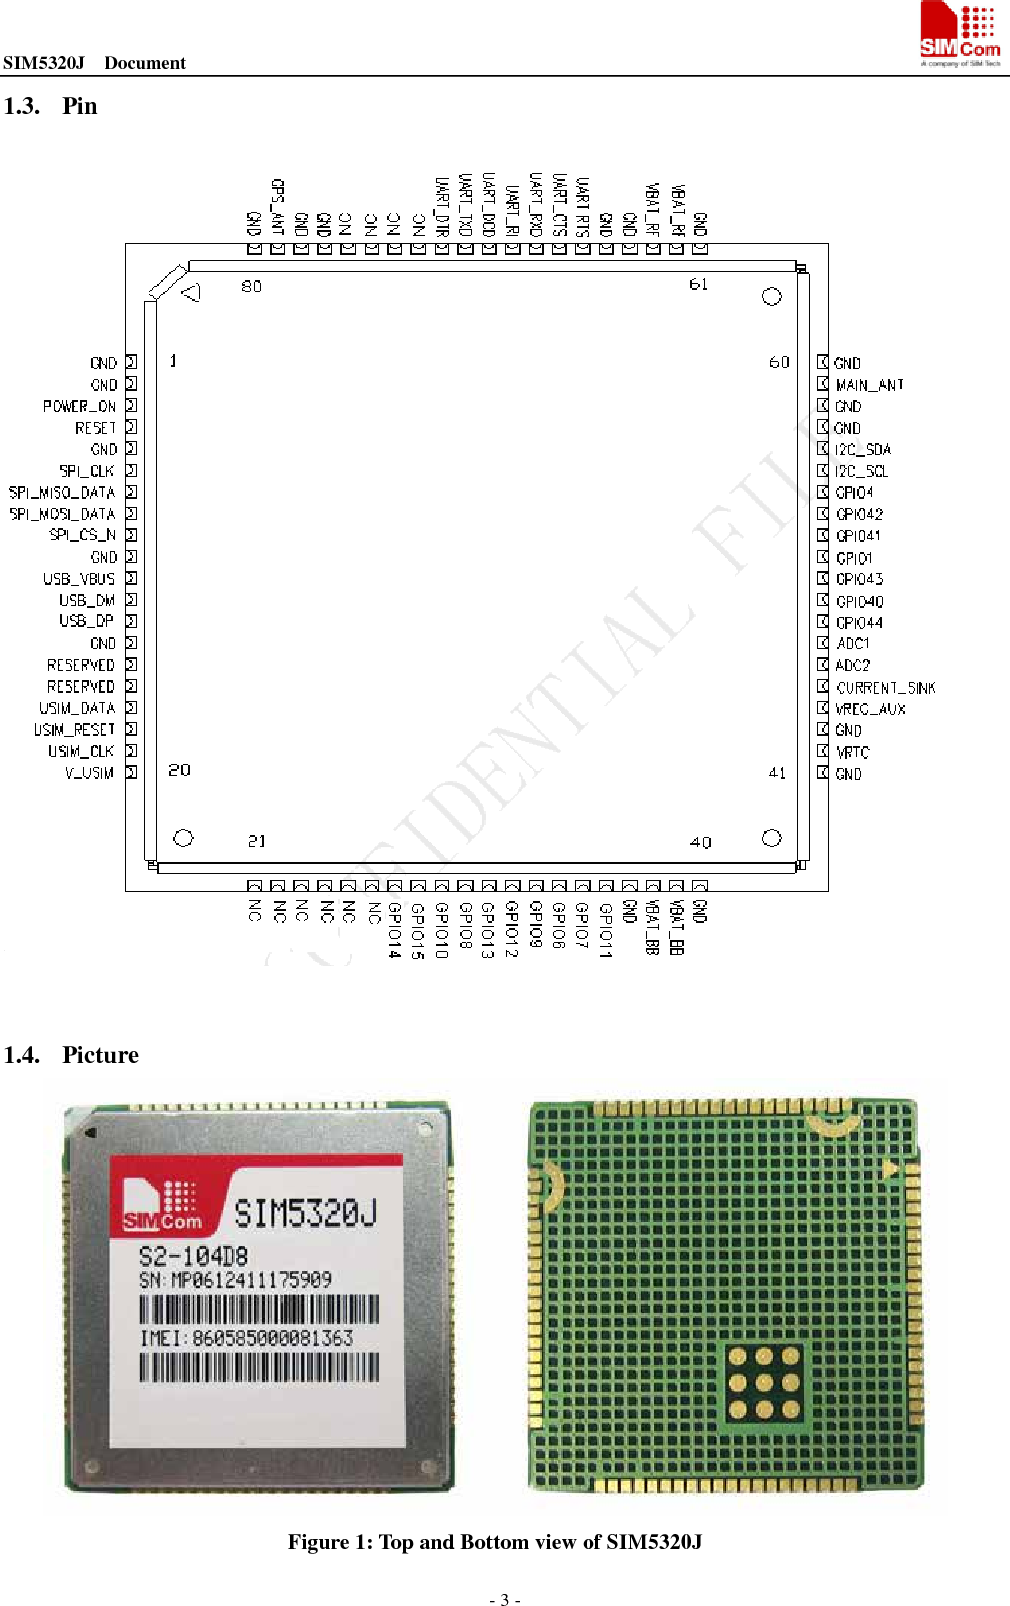 SIM5320J  Document                                                                                - 3 - 1.3. Pin    1.4. Picture  Figure 1: Top and Bottom view of SIM5320J 